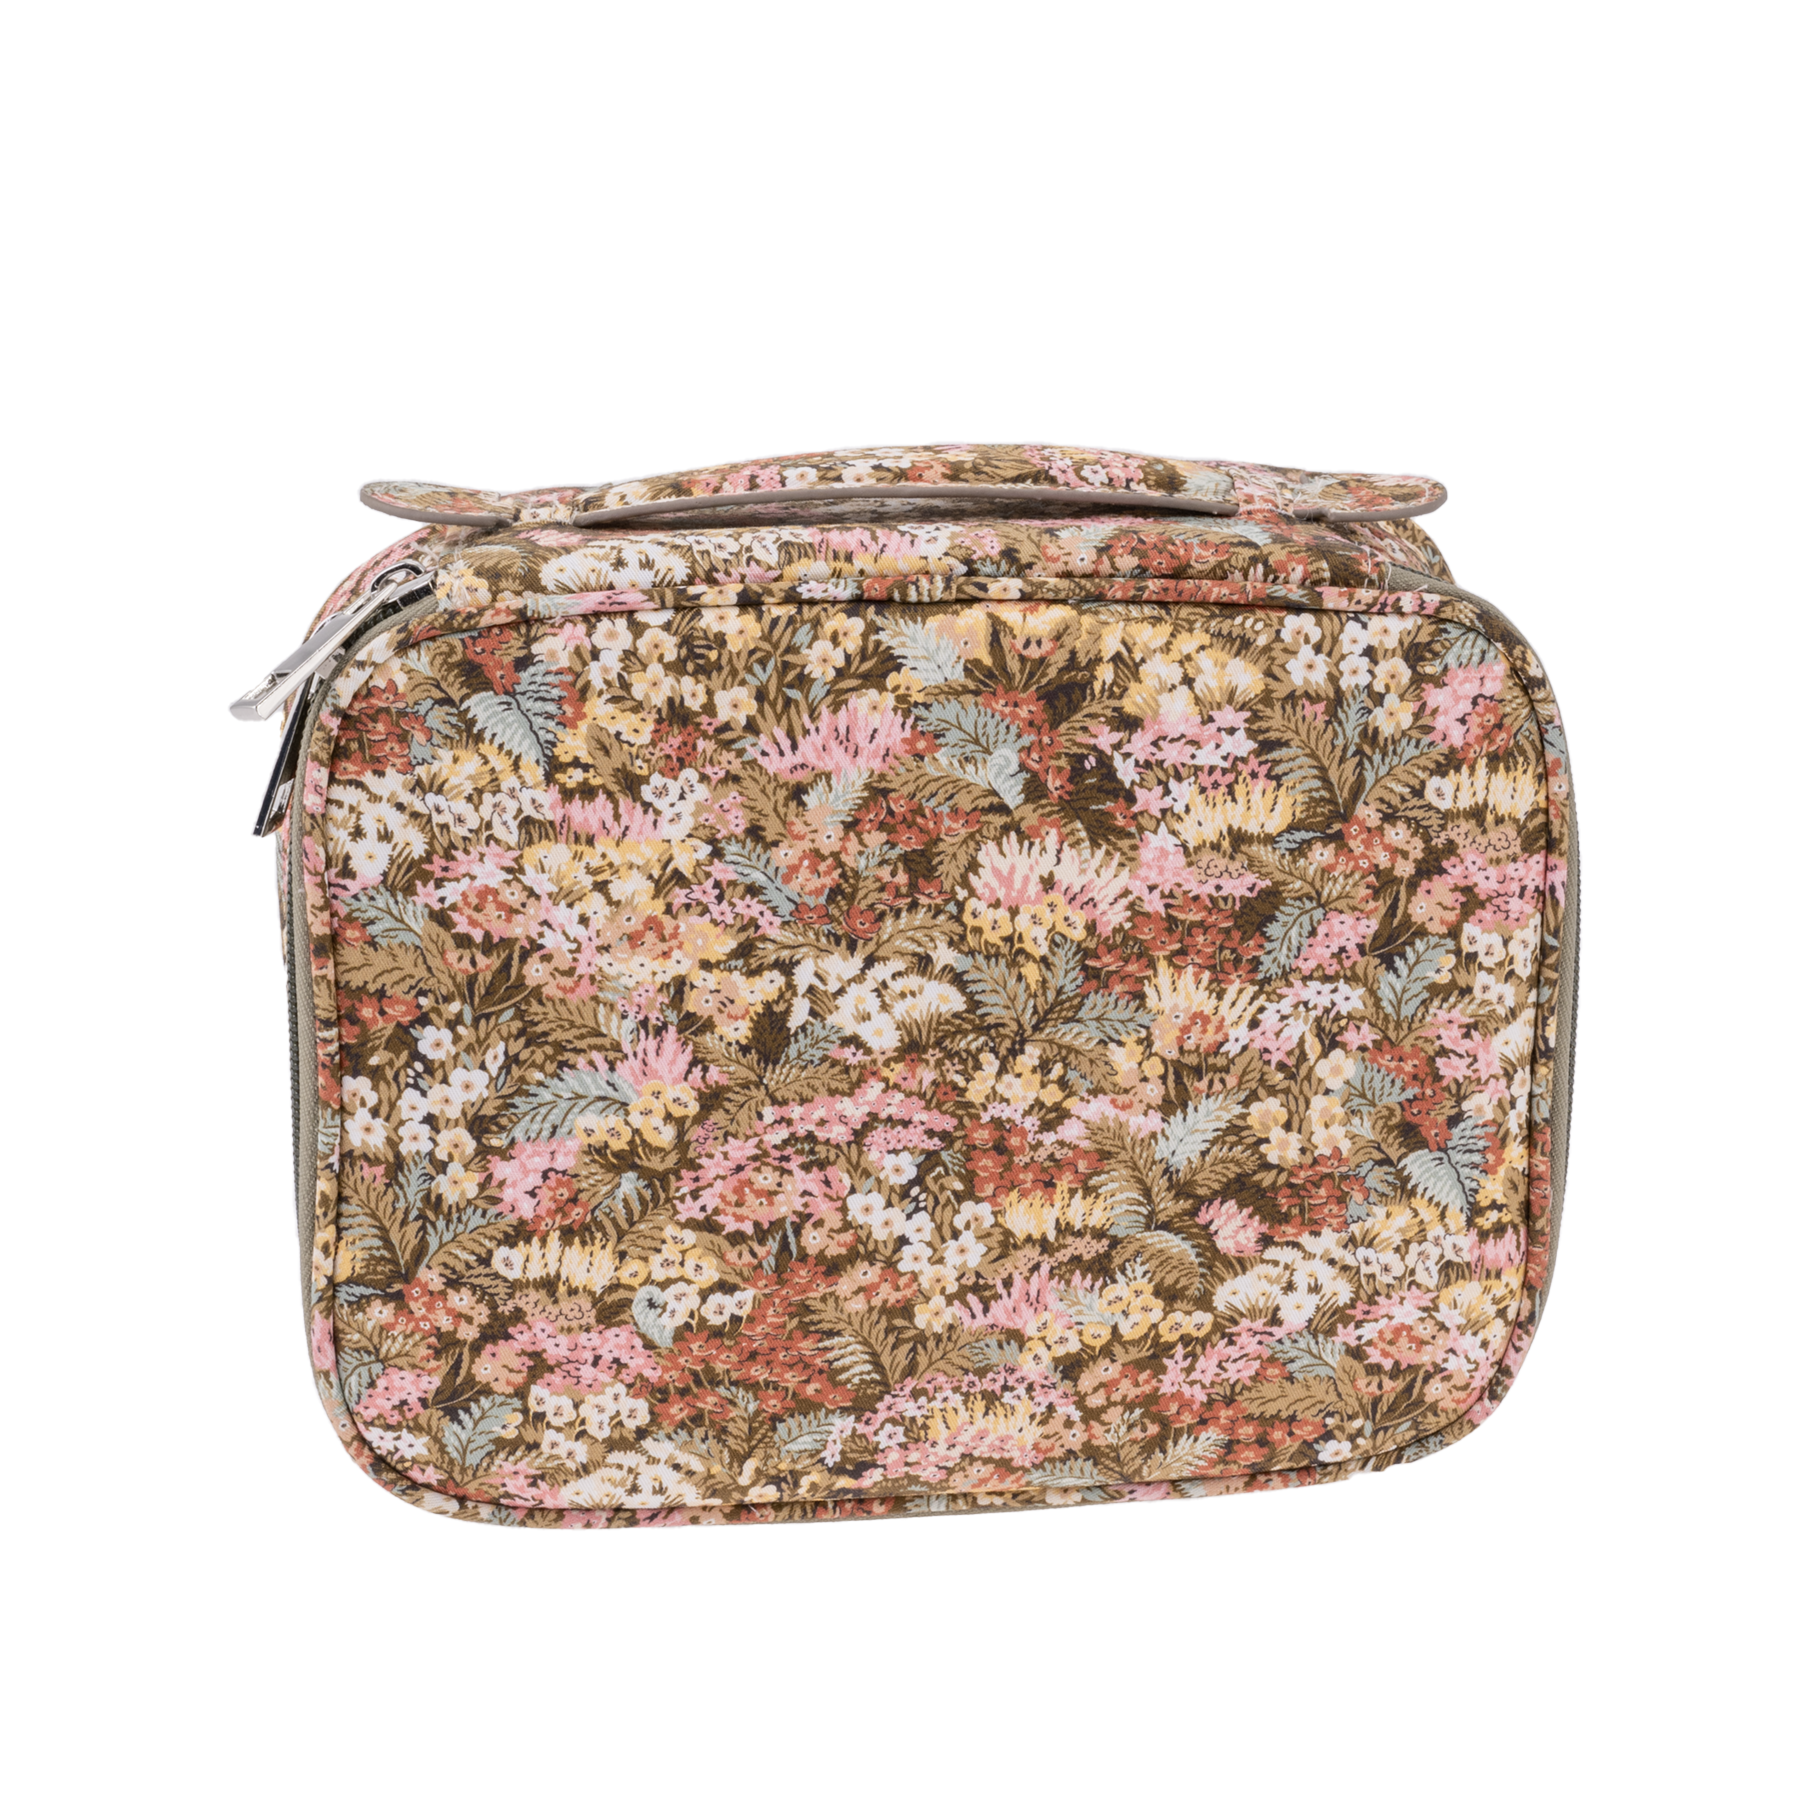 SOFT BEAUTY BAG MW LIBERTY CONNIE EVELYN